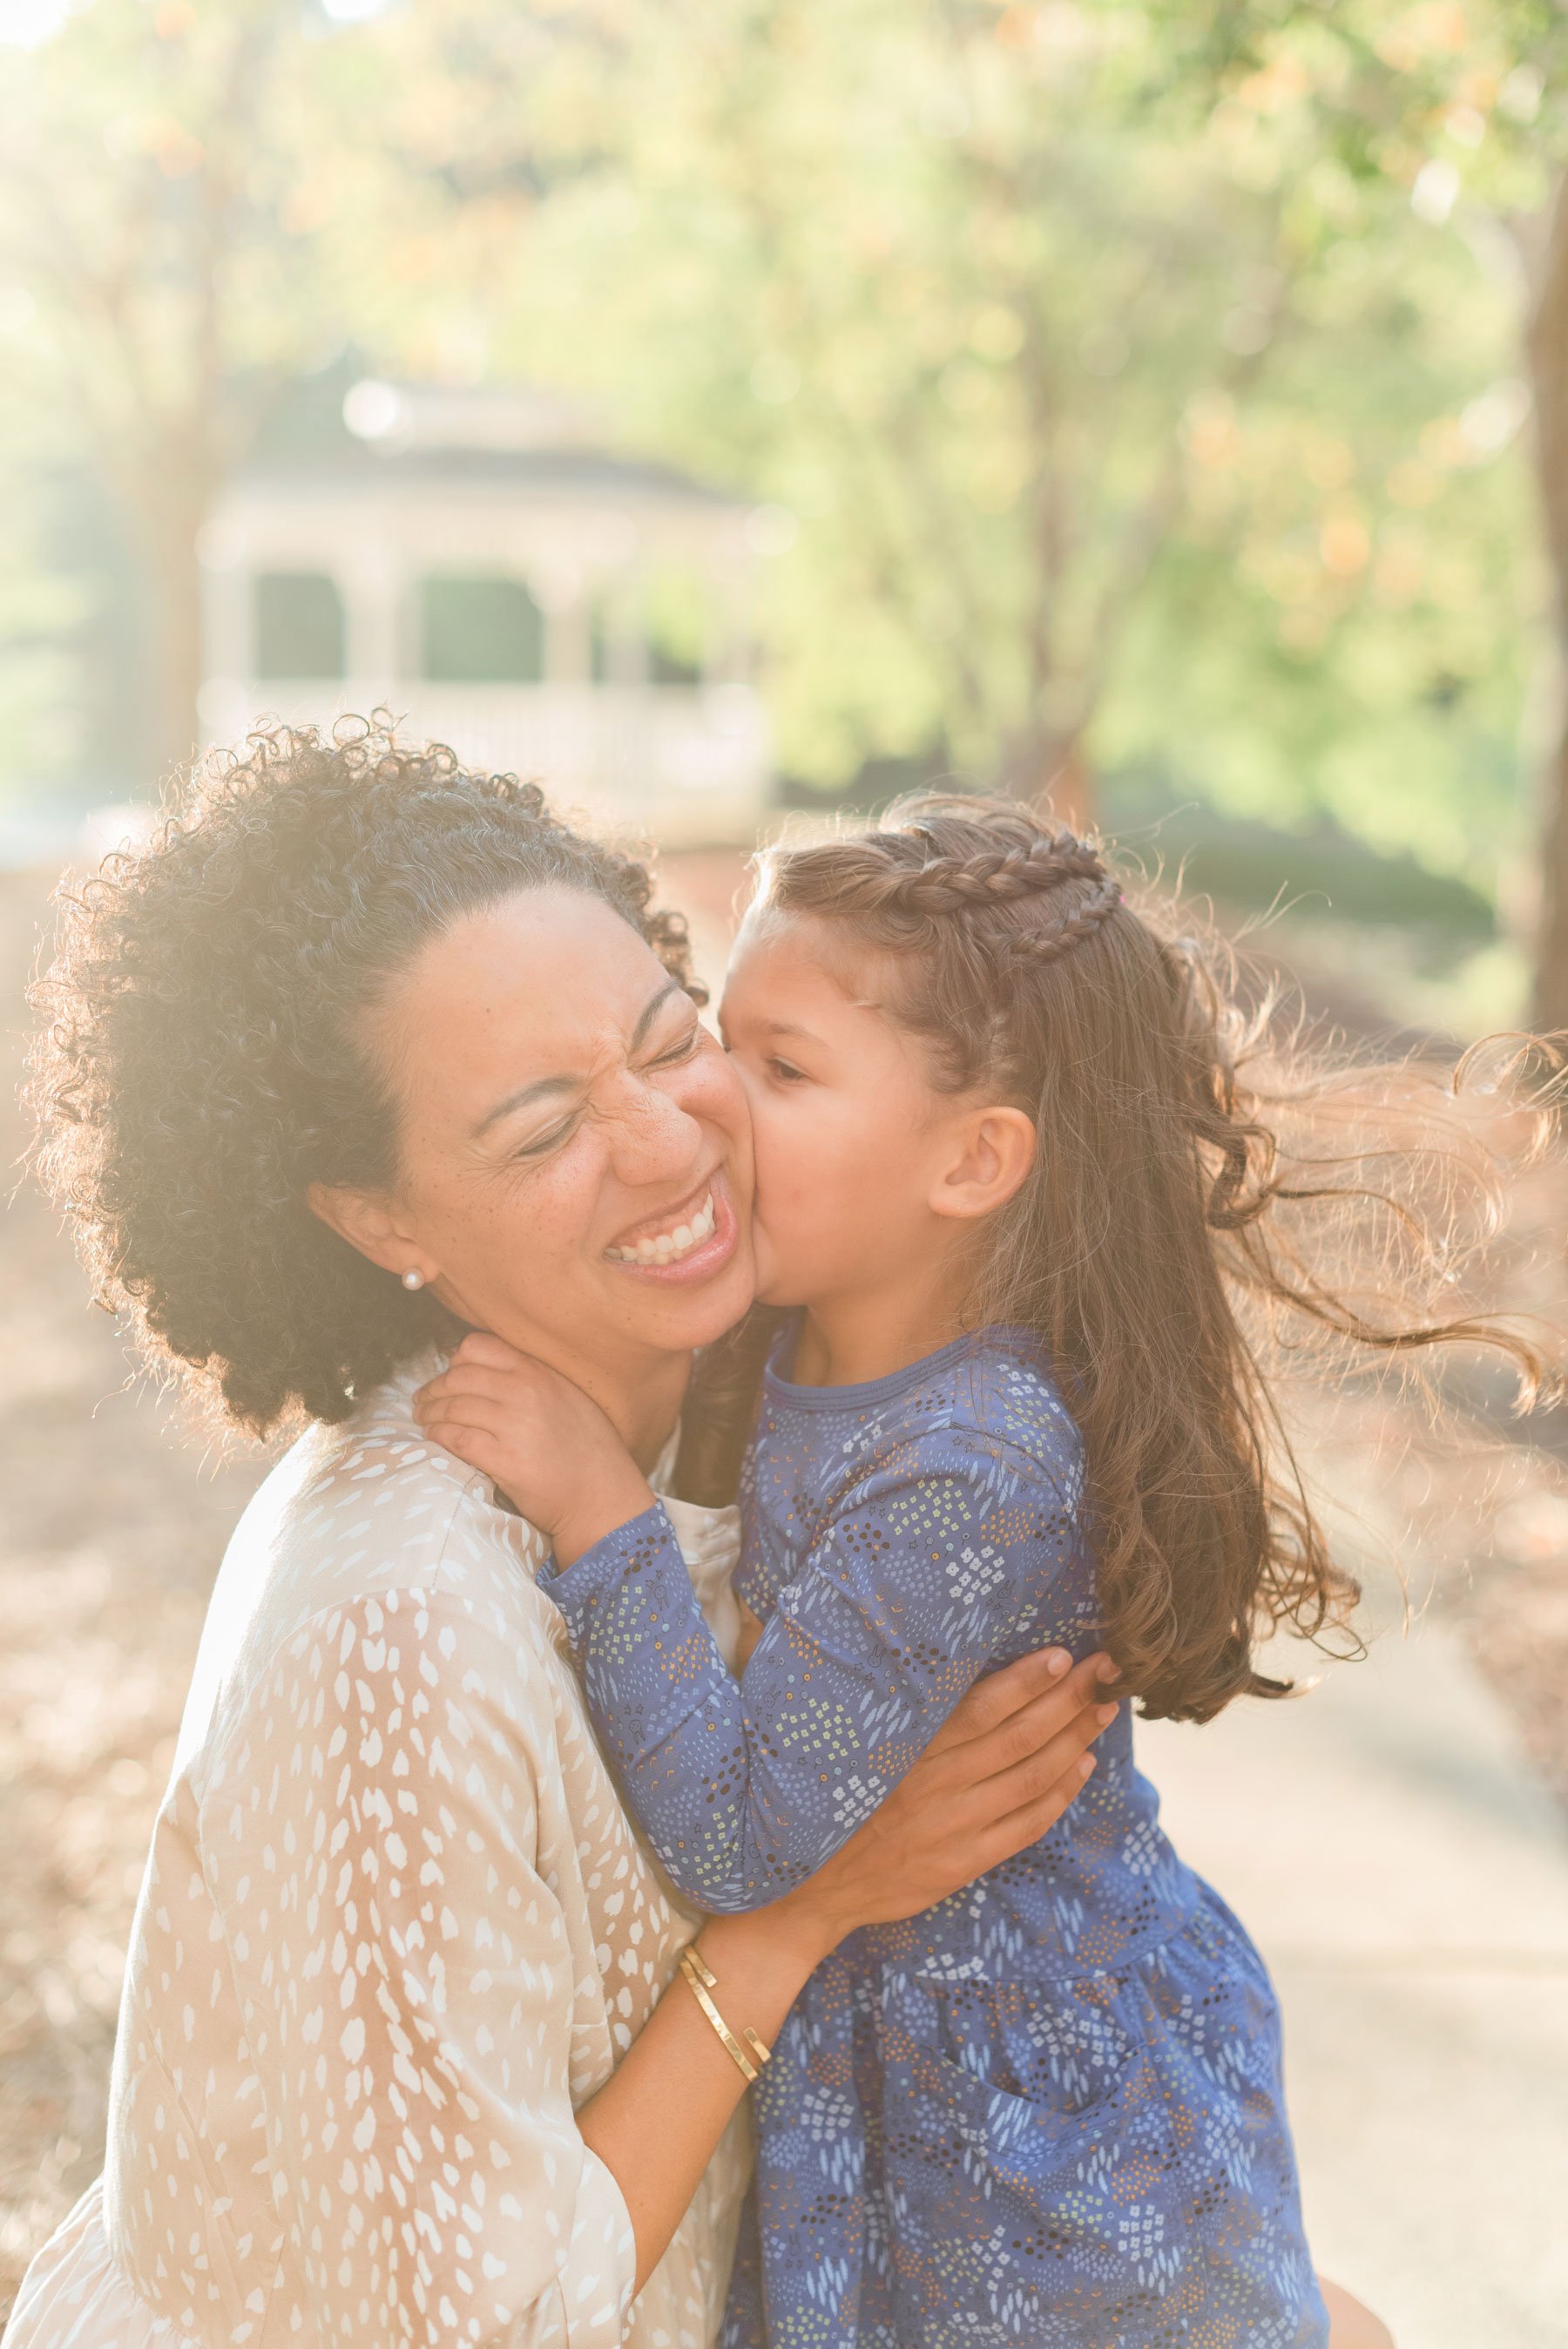    Little Eva gives her mom a kiss on the cheek in this candid mother-daughter photo. #candidfamilyphotos #atlantafamilyphotographer #familyphotoswithkids #familyoutfitinspo #confidentkids #kidsselfesteem # confidencetips #georgiafamilyphotos #georgi